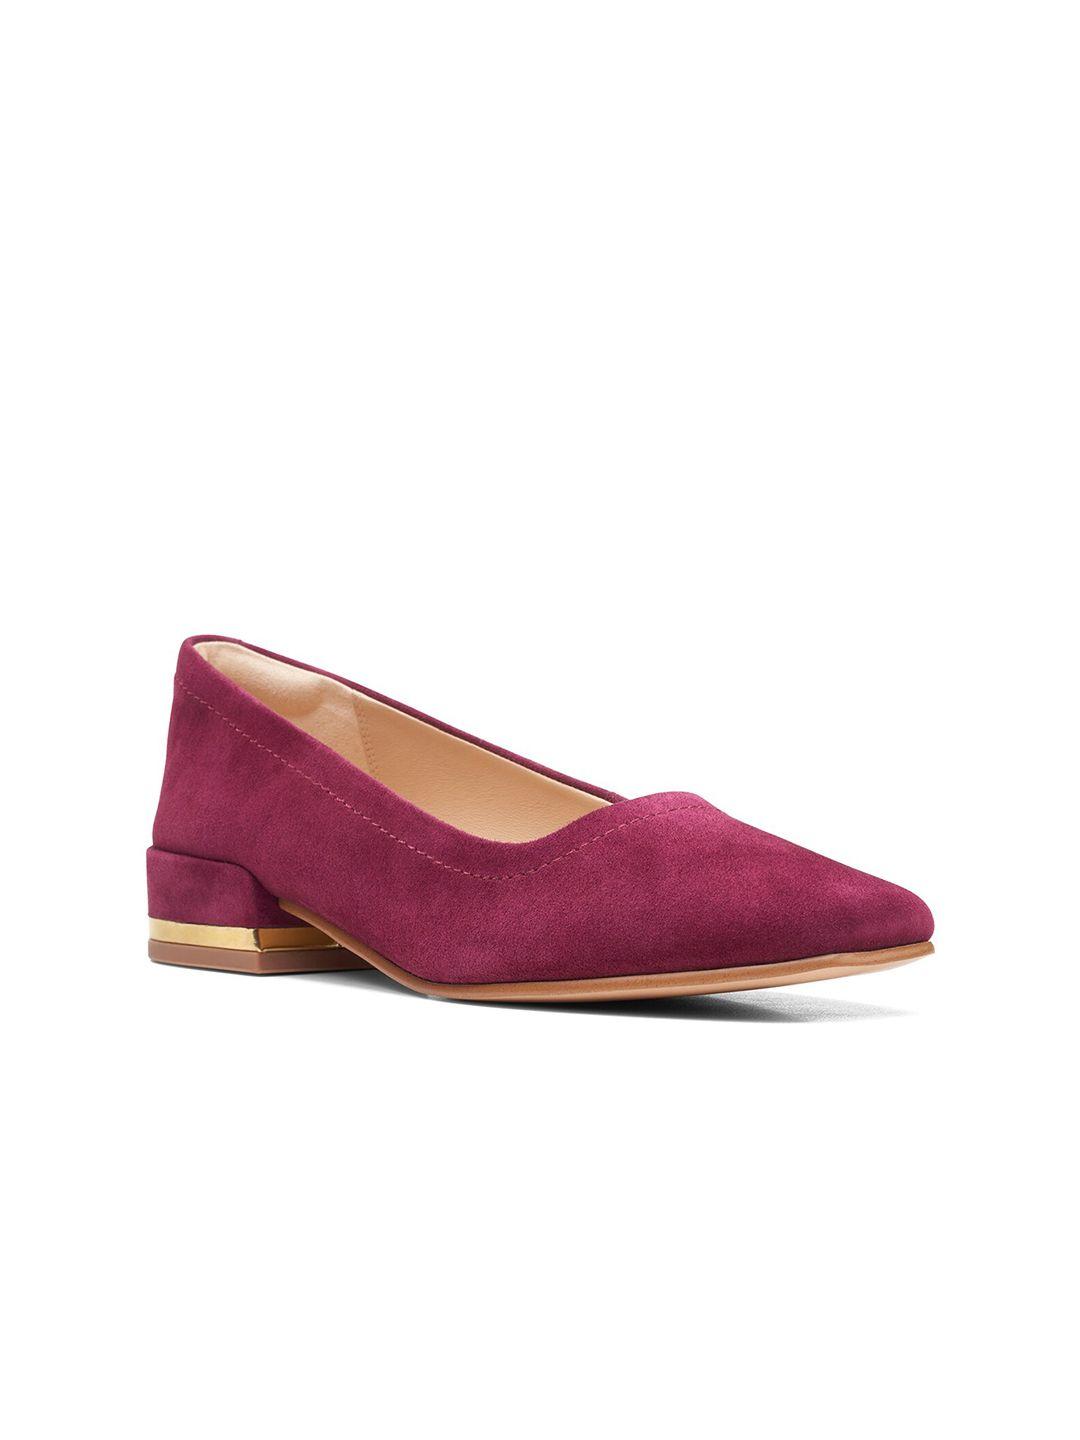 clarks red leather block pumps